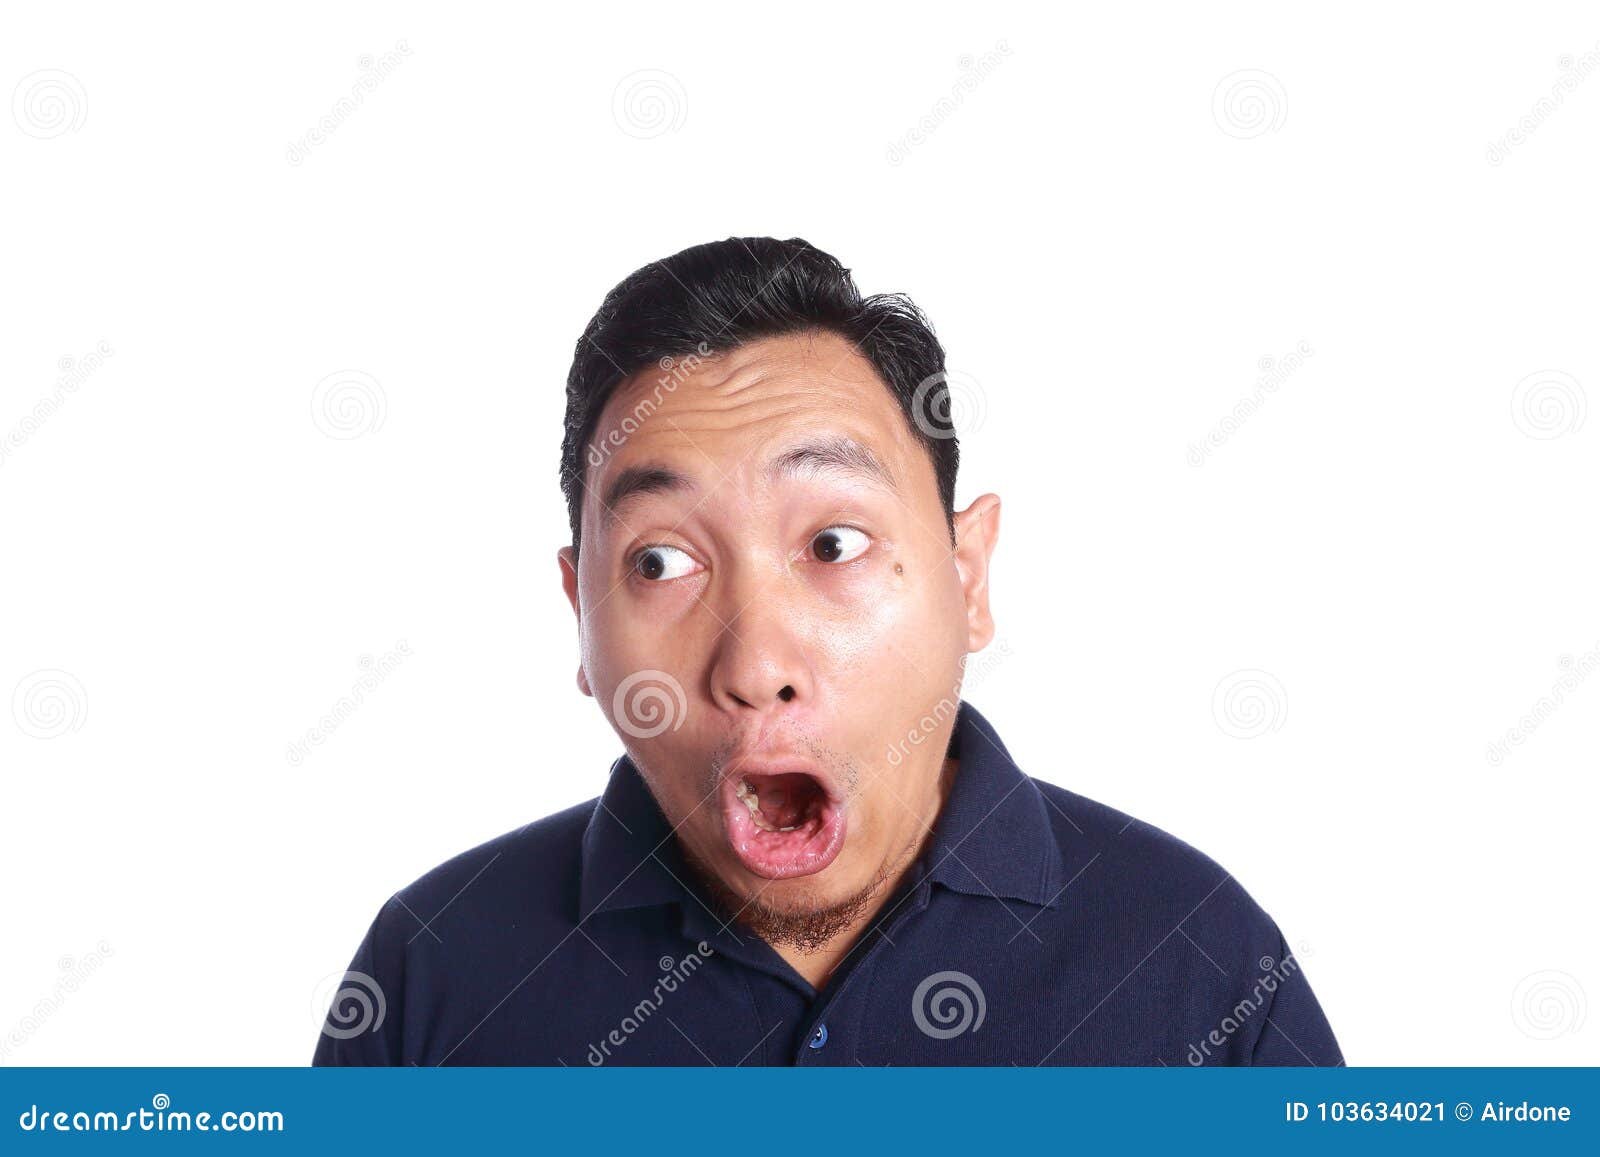 Asian Man Shocked with Mouth Open Stock Image - Image of beard, facial ...